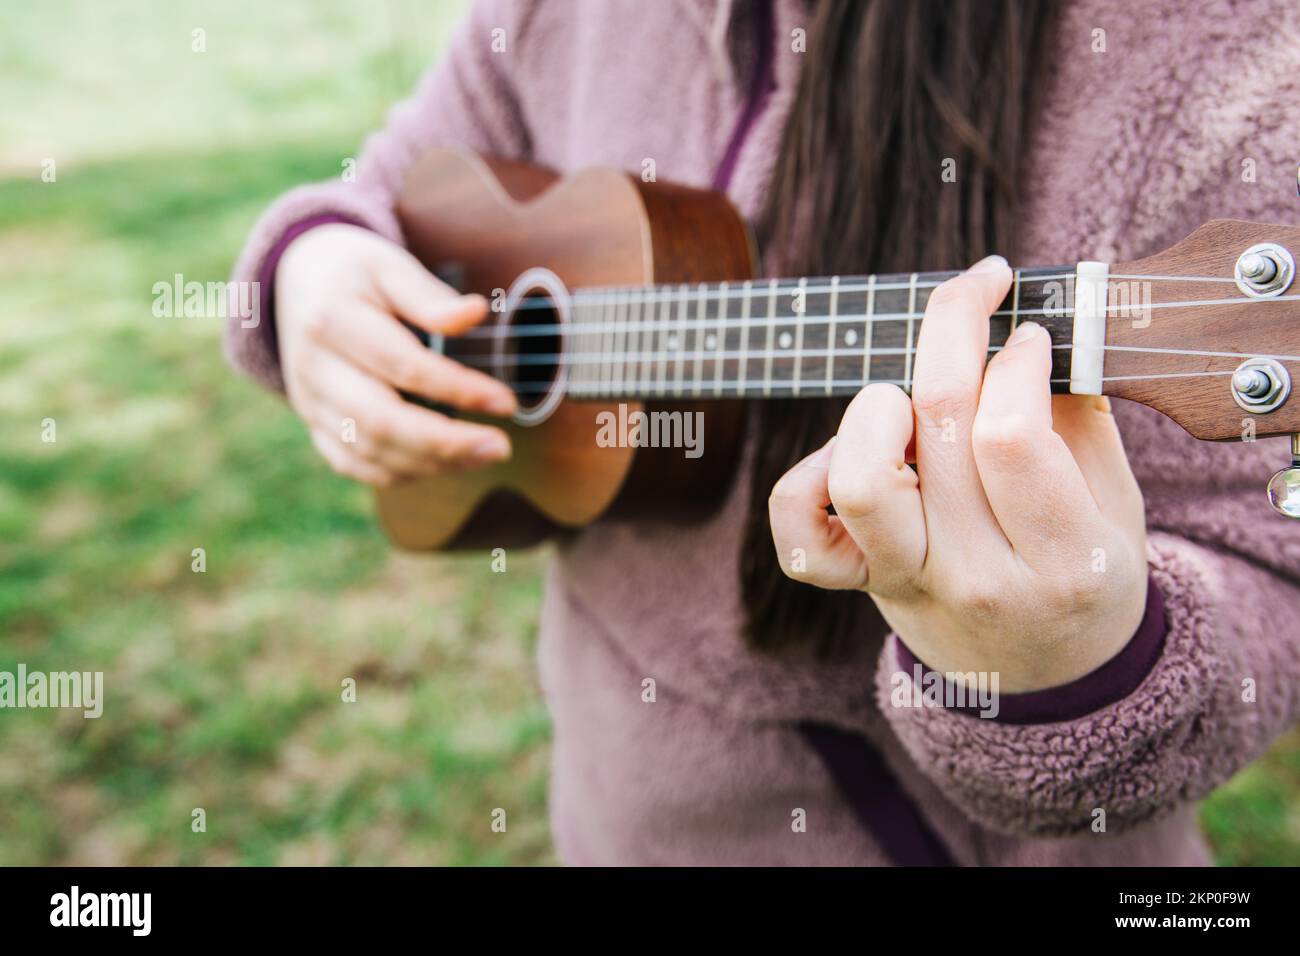 Unrecognizable female person playing ukelele standing on the grass. Stock Photo